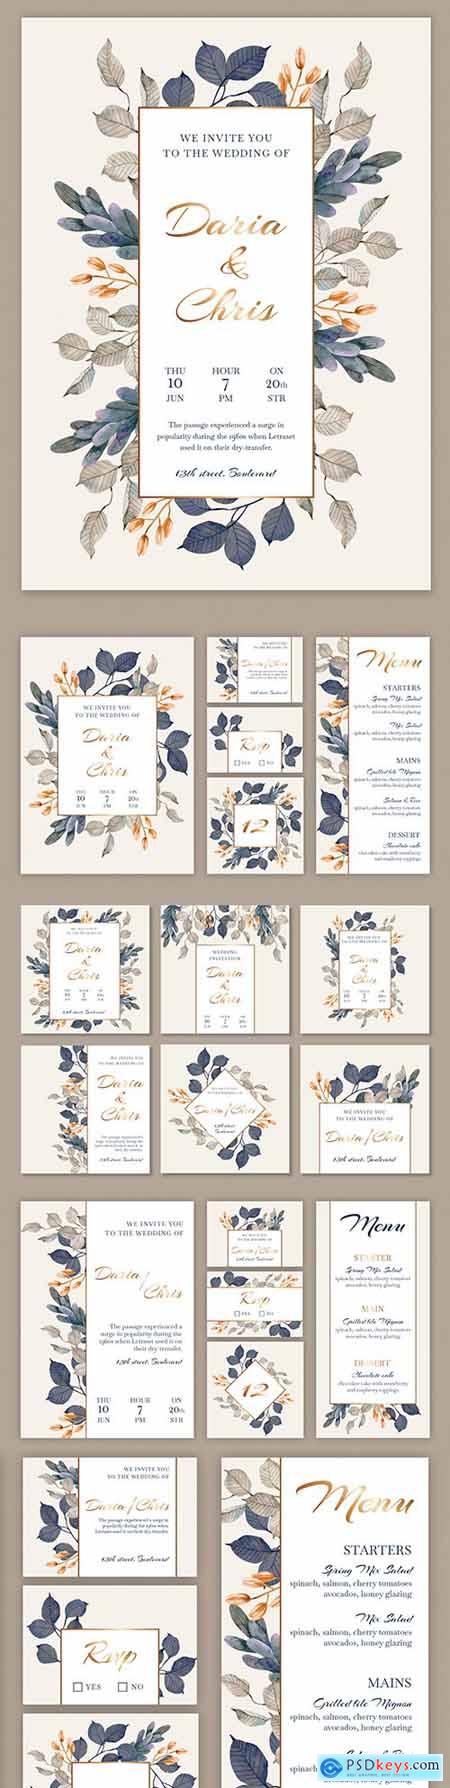 Floral wedding stationery and instagram post design template